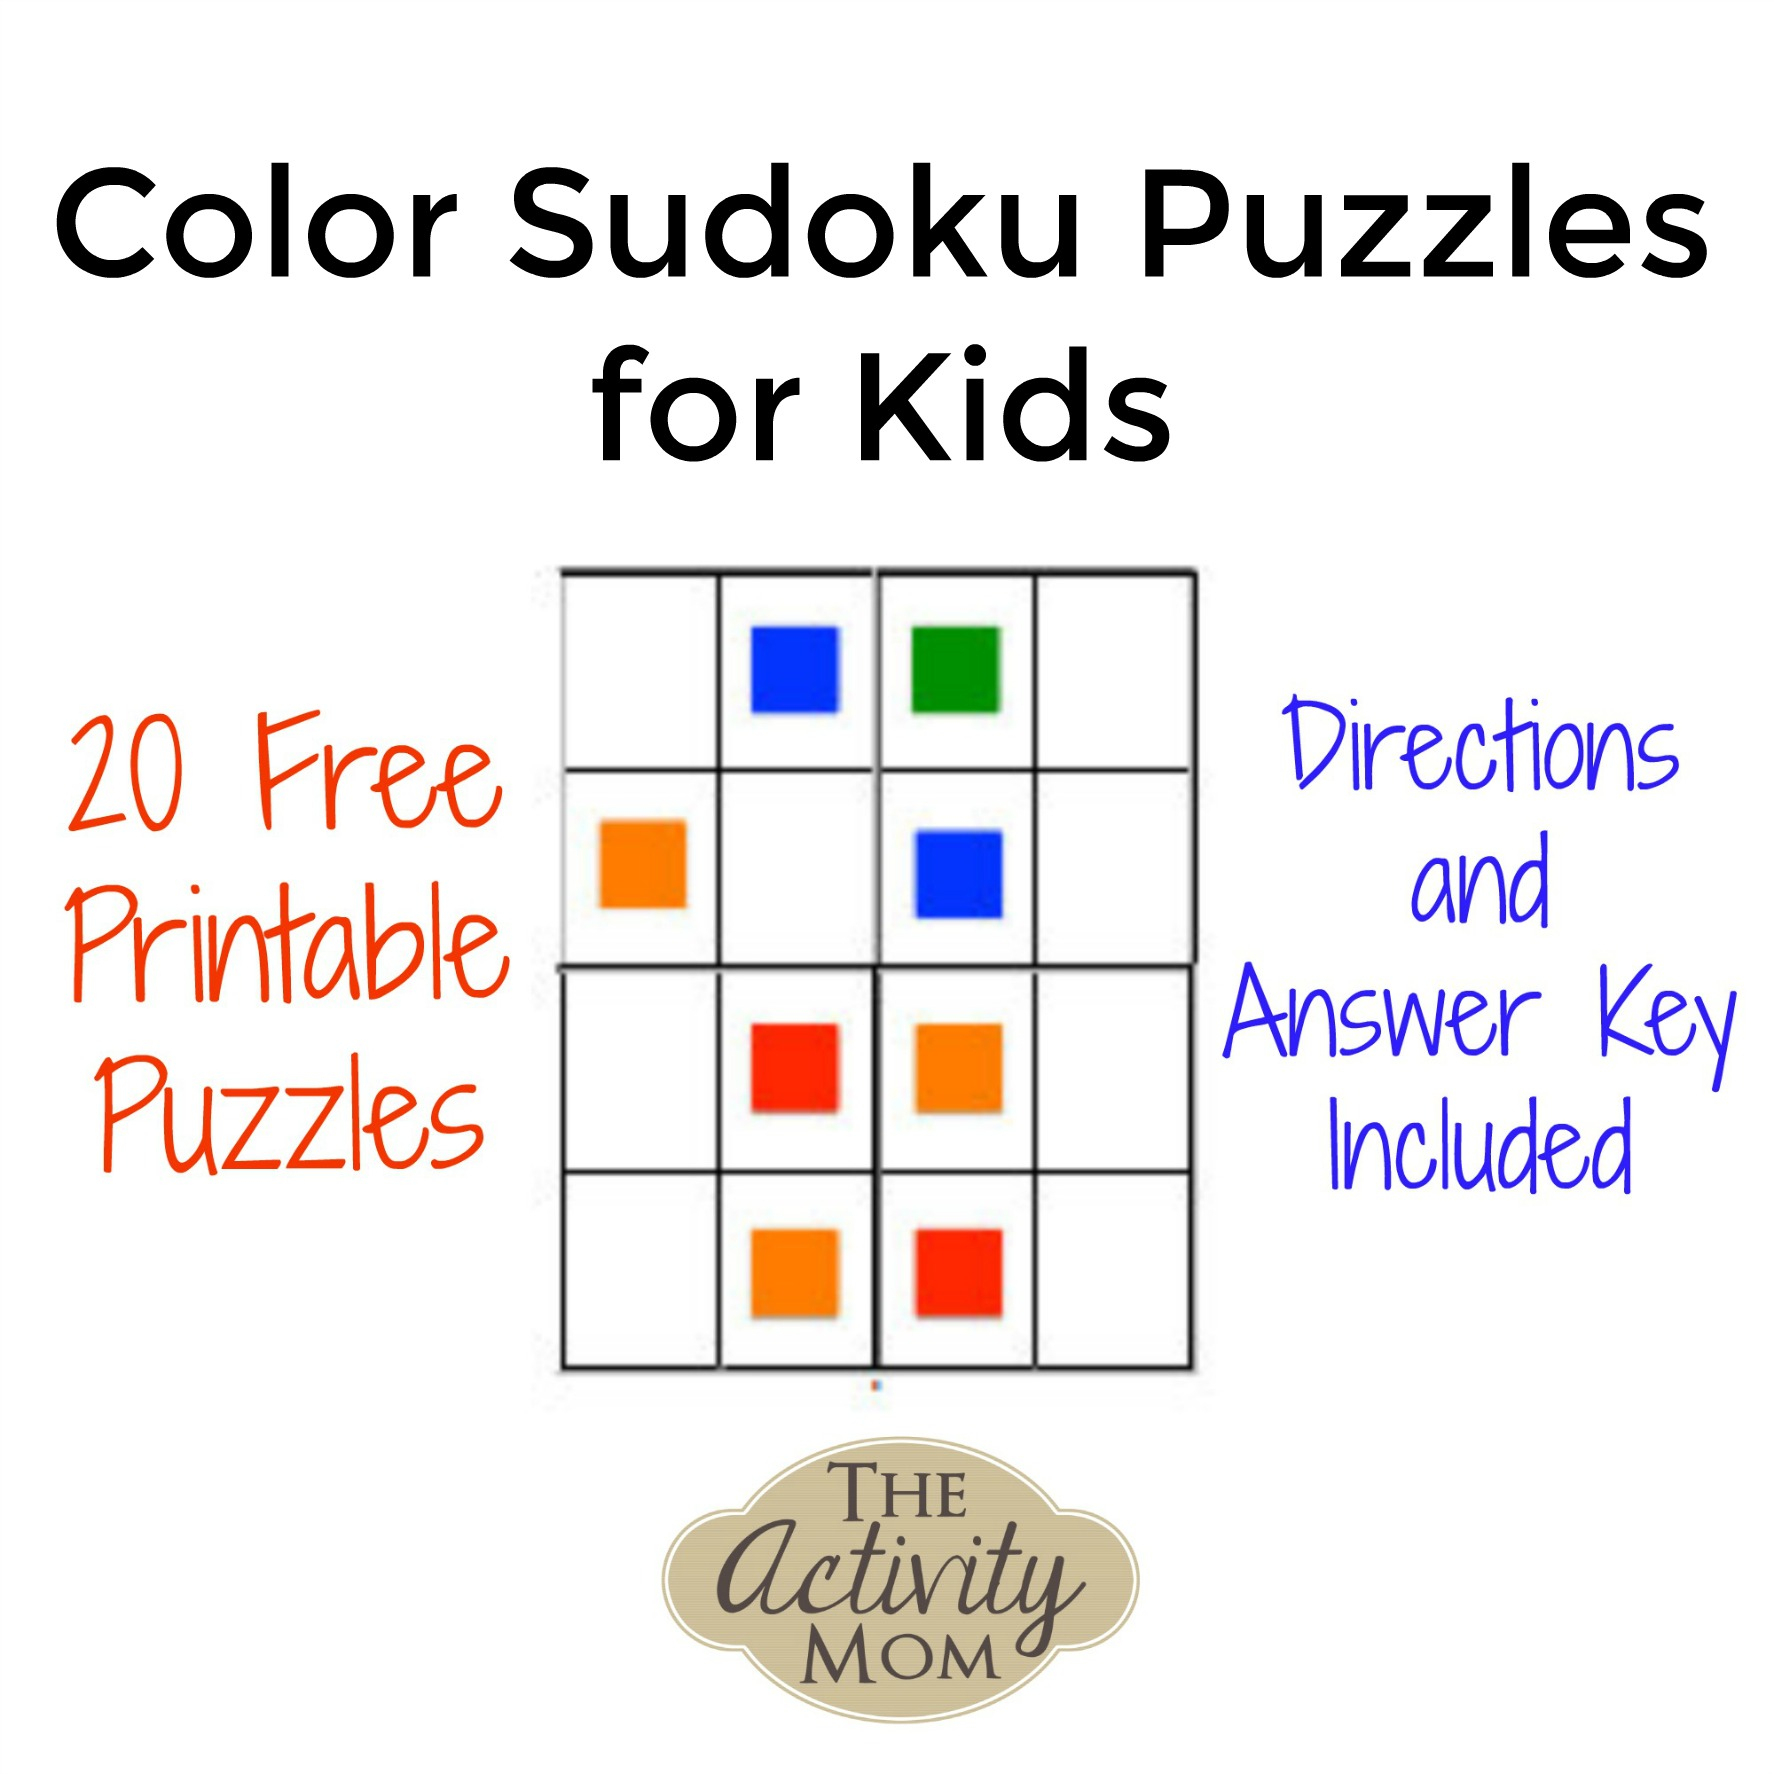 The Activity Mom - Free Printable Color Sudoku Puzzles For